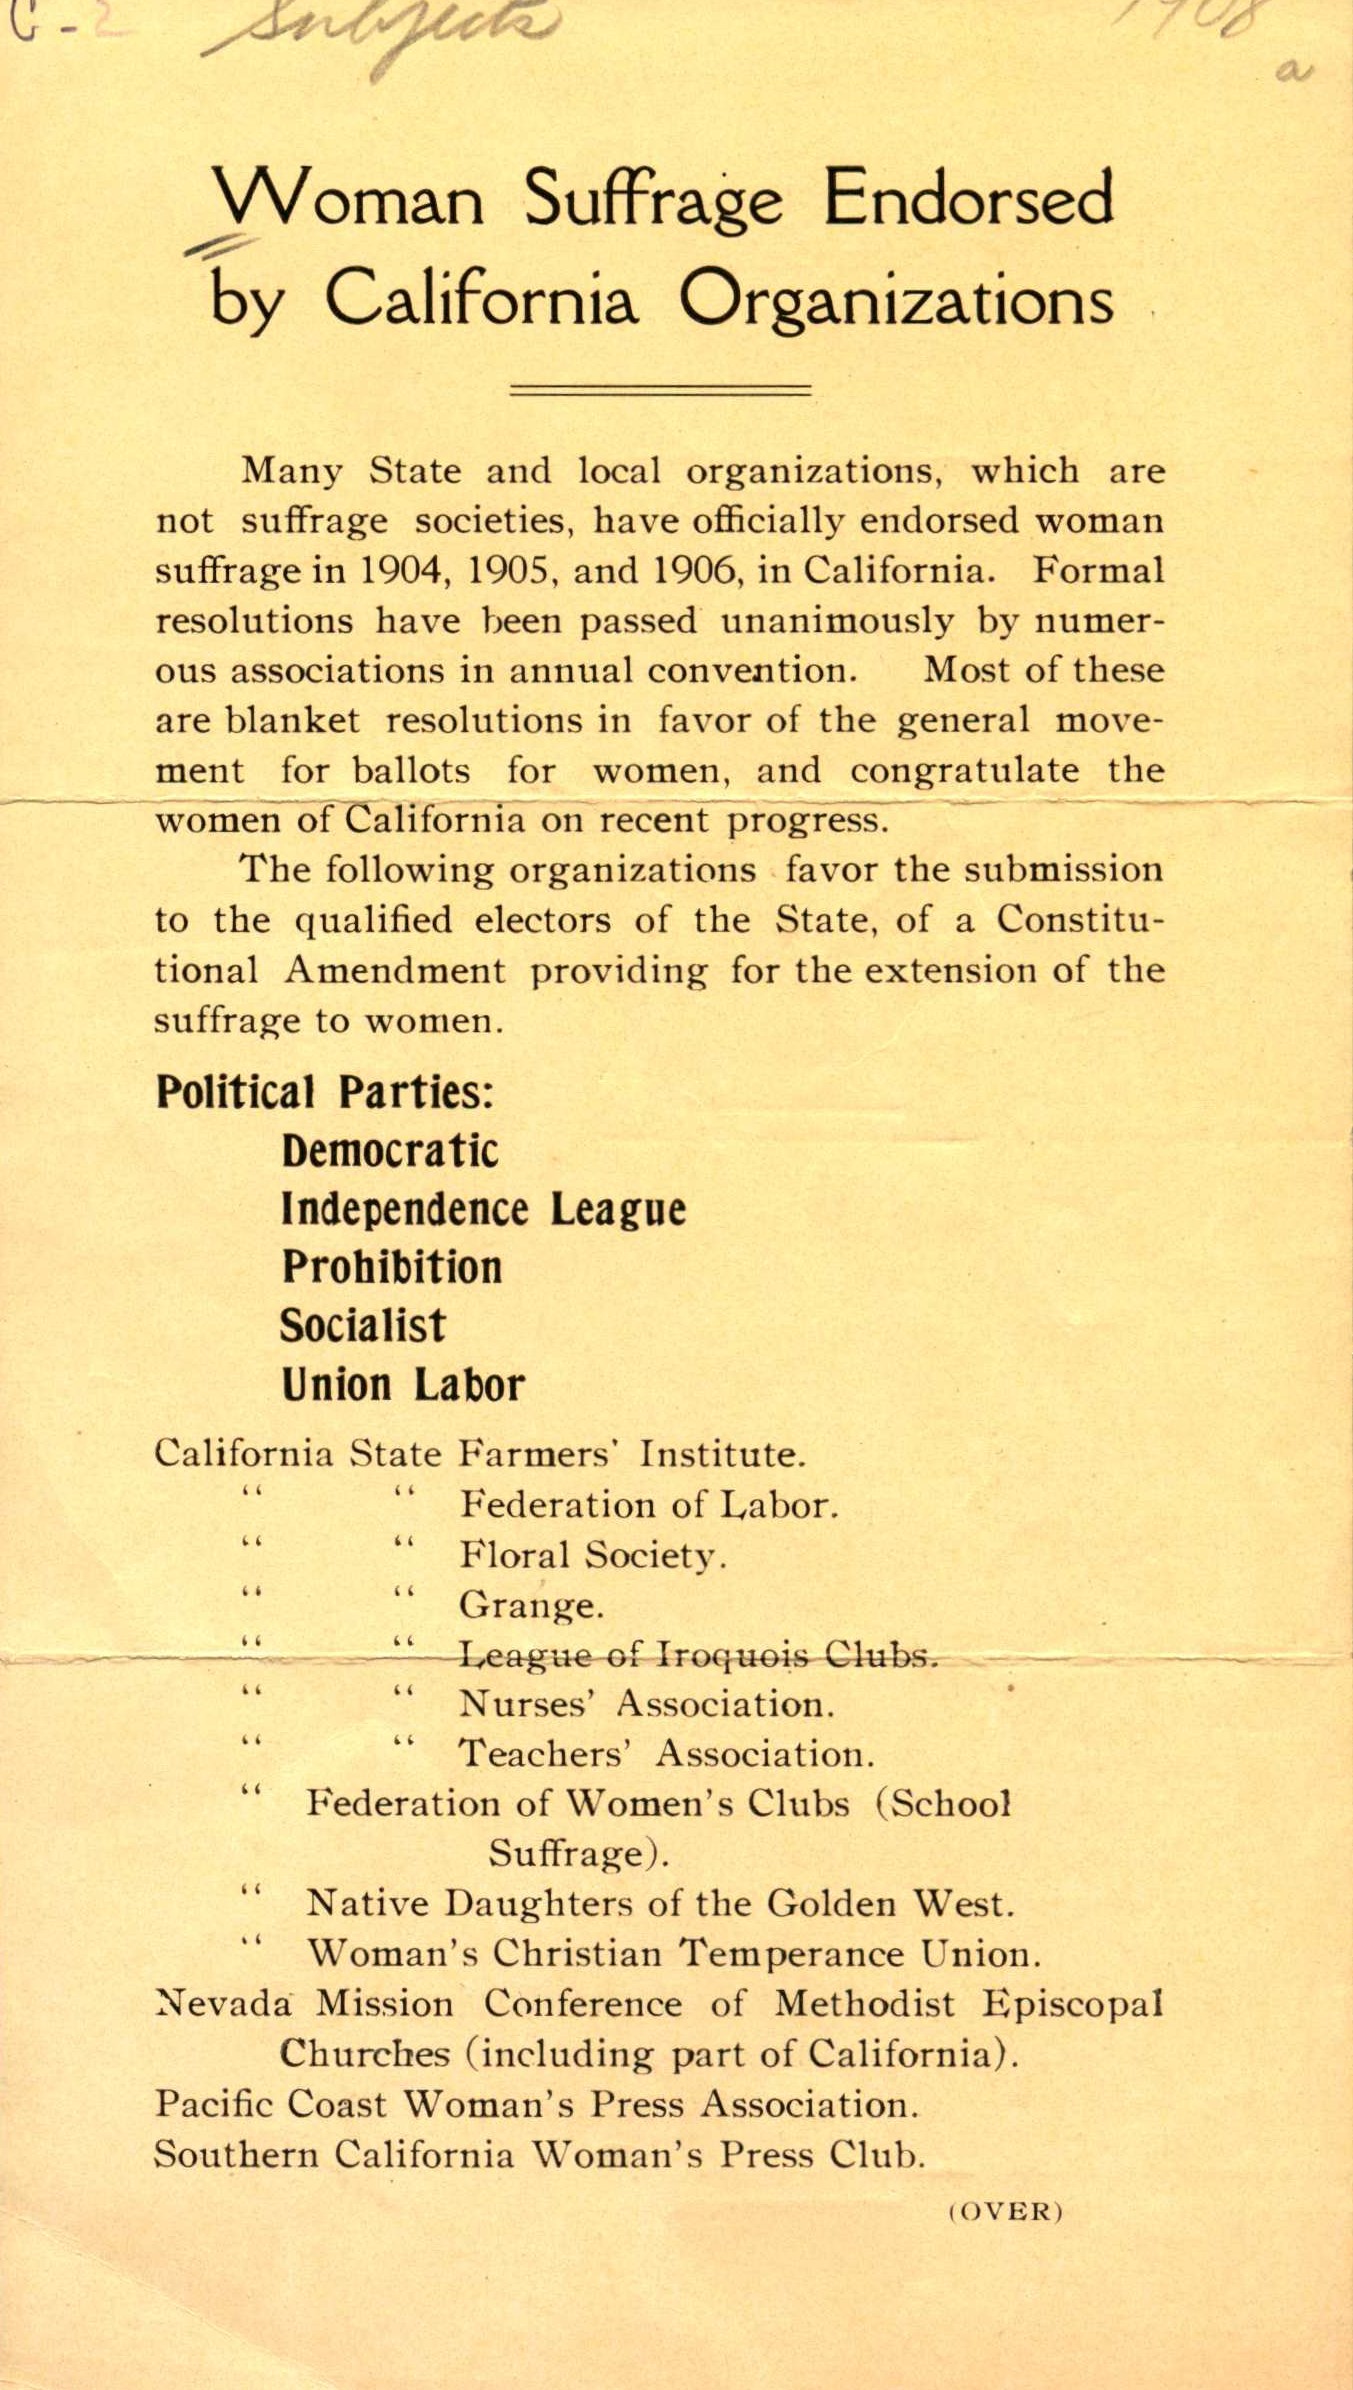 Shows title information and political parties and organizations that supported suffrage